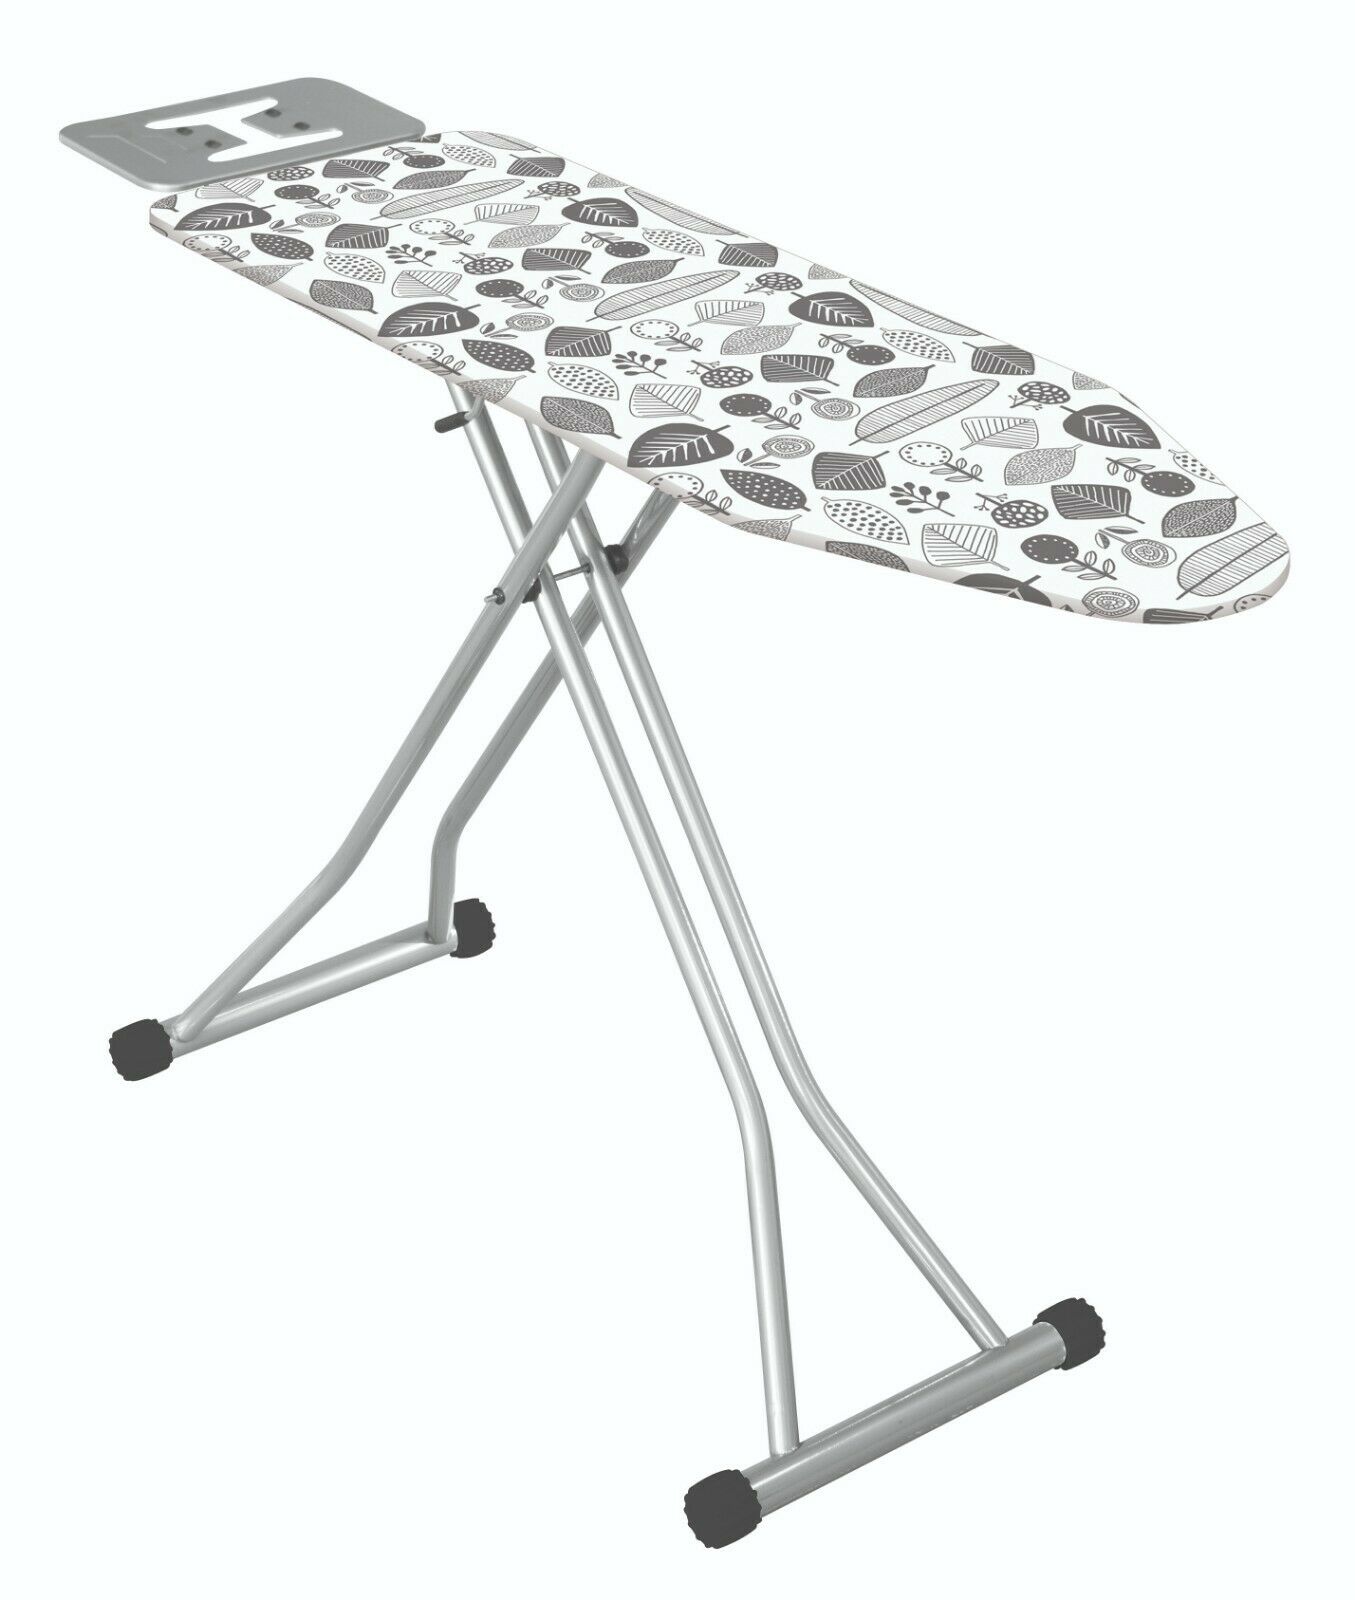 47 Inches  Large  Steel Ironing Board With Iron Rest Made In Turkey